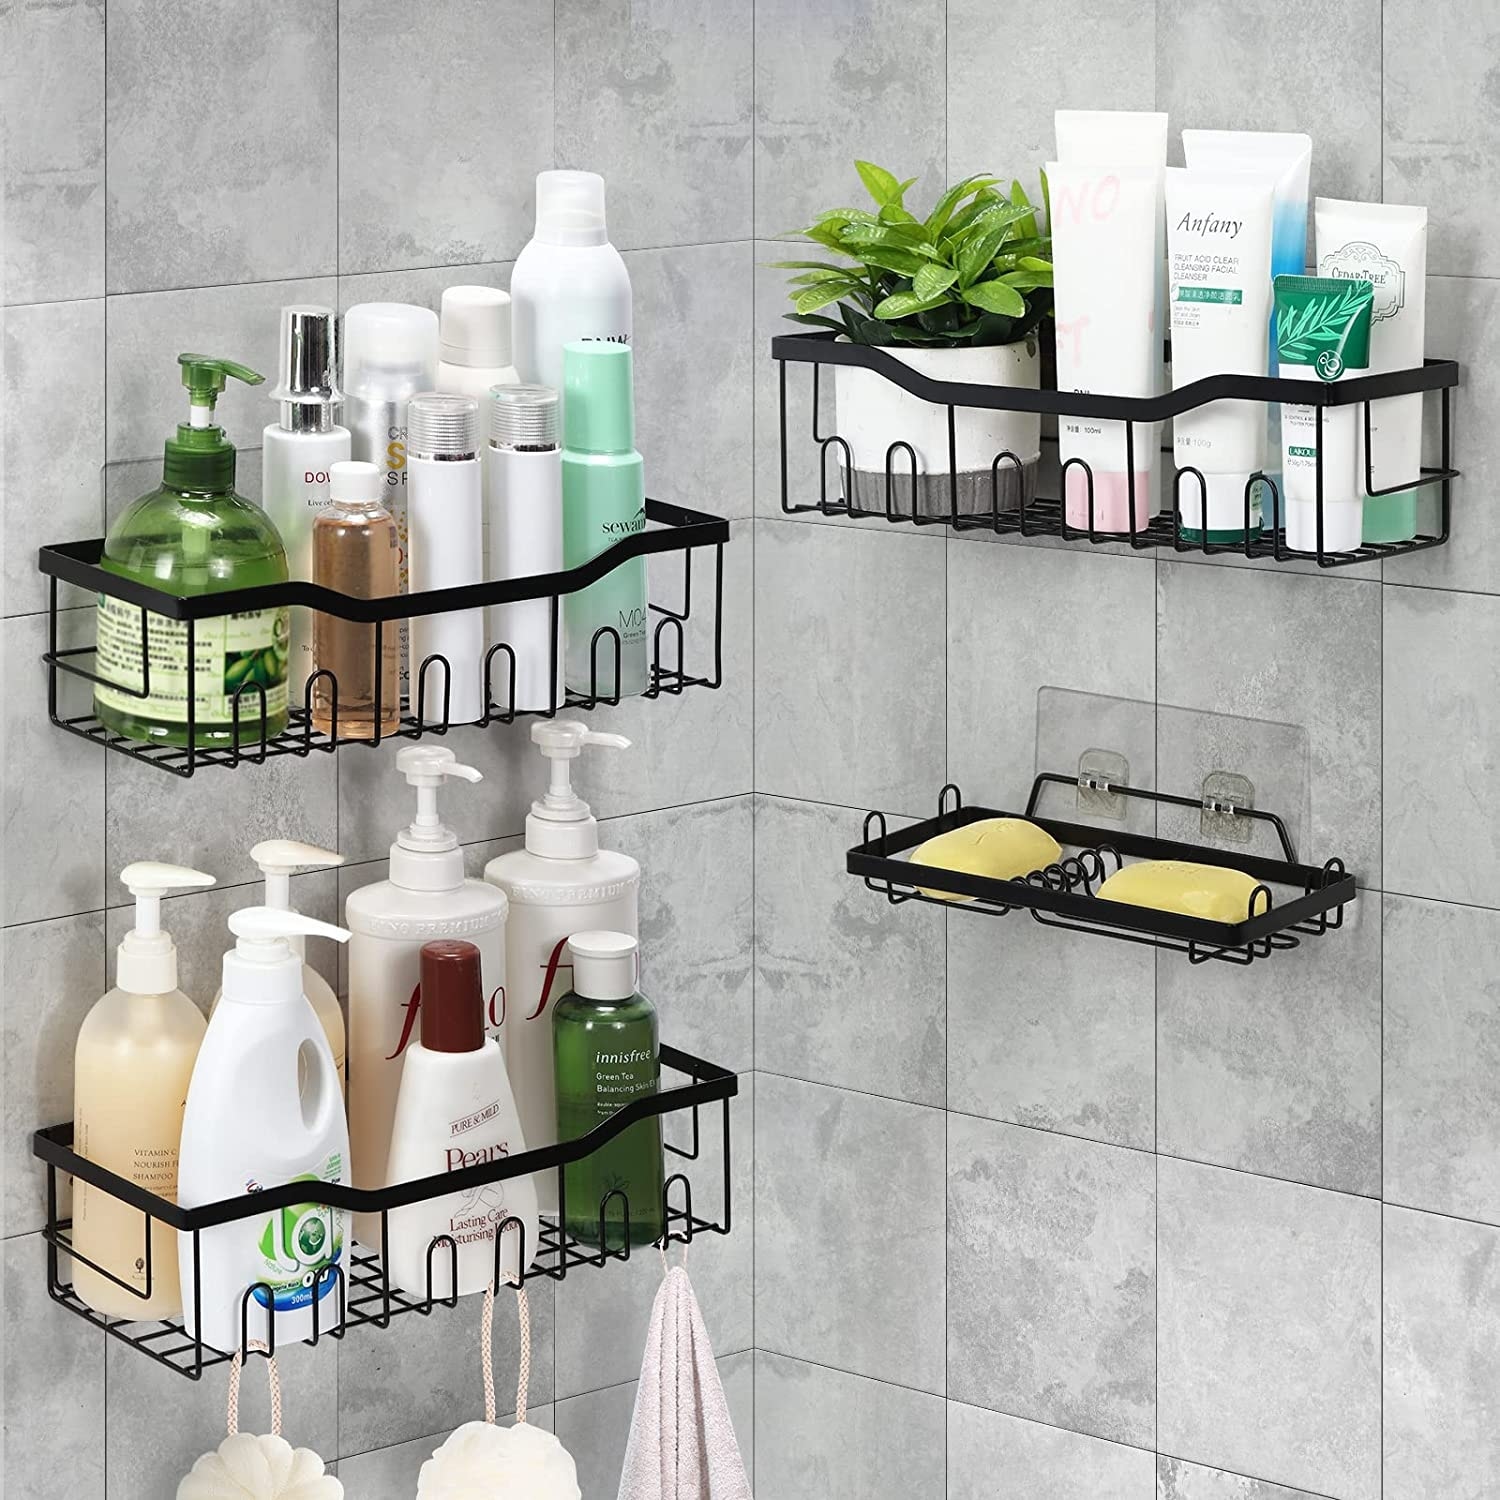 https://ak1.ostkcdn.com/images/products/is/images/direct/7f4ea90e77029fa01dff5cc2a2f42d3c04f7f6f9/4-Pack-Shower-Caddy.jpg